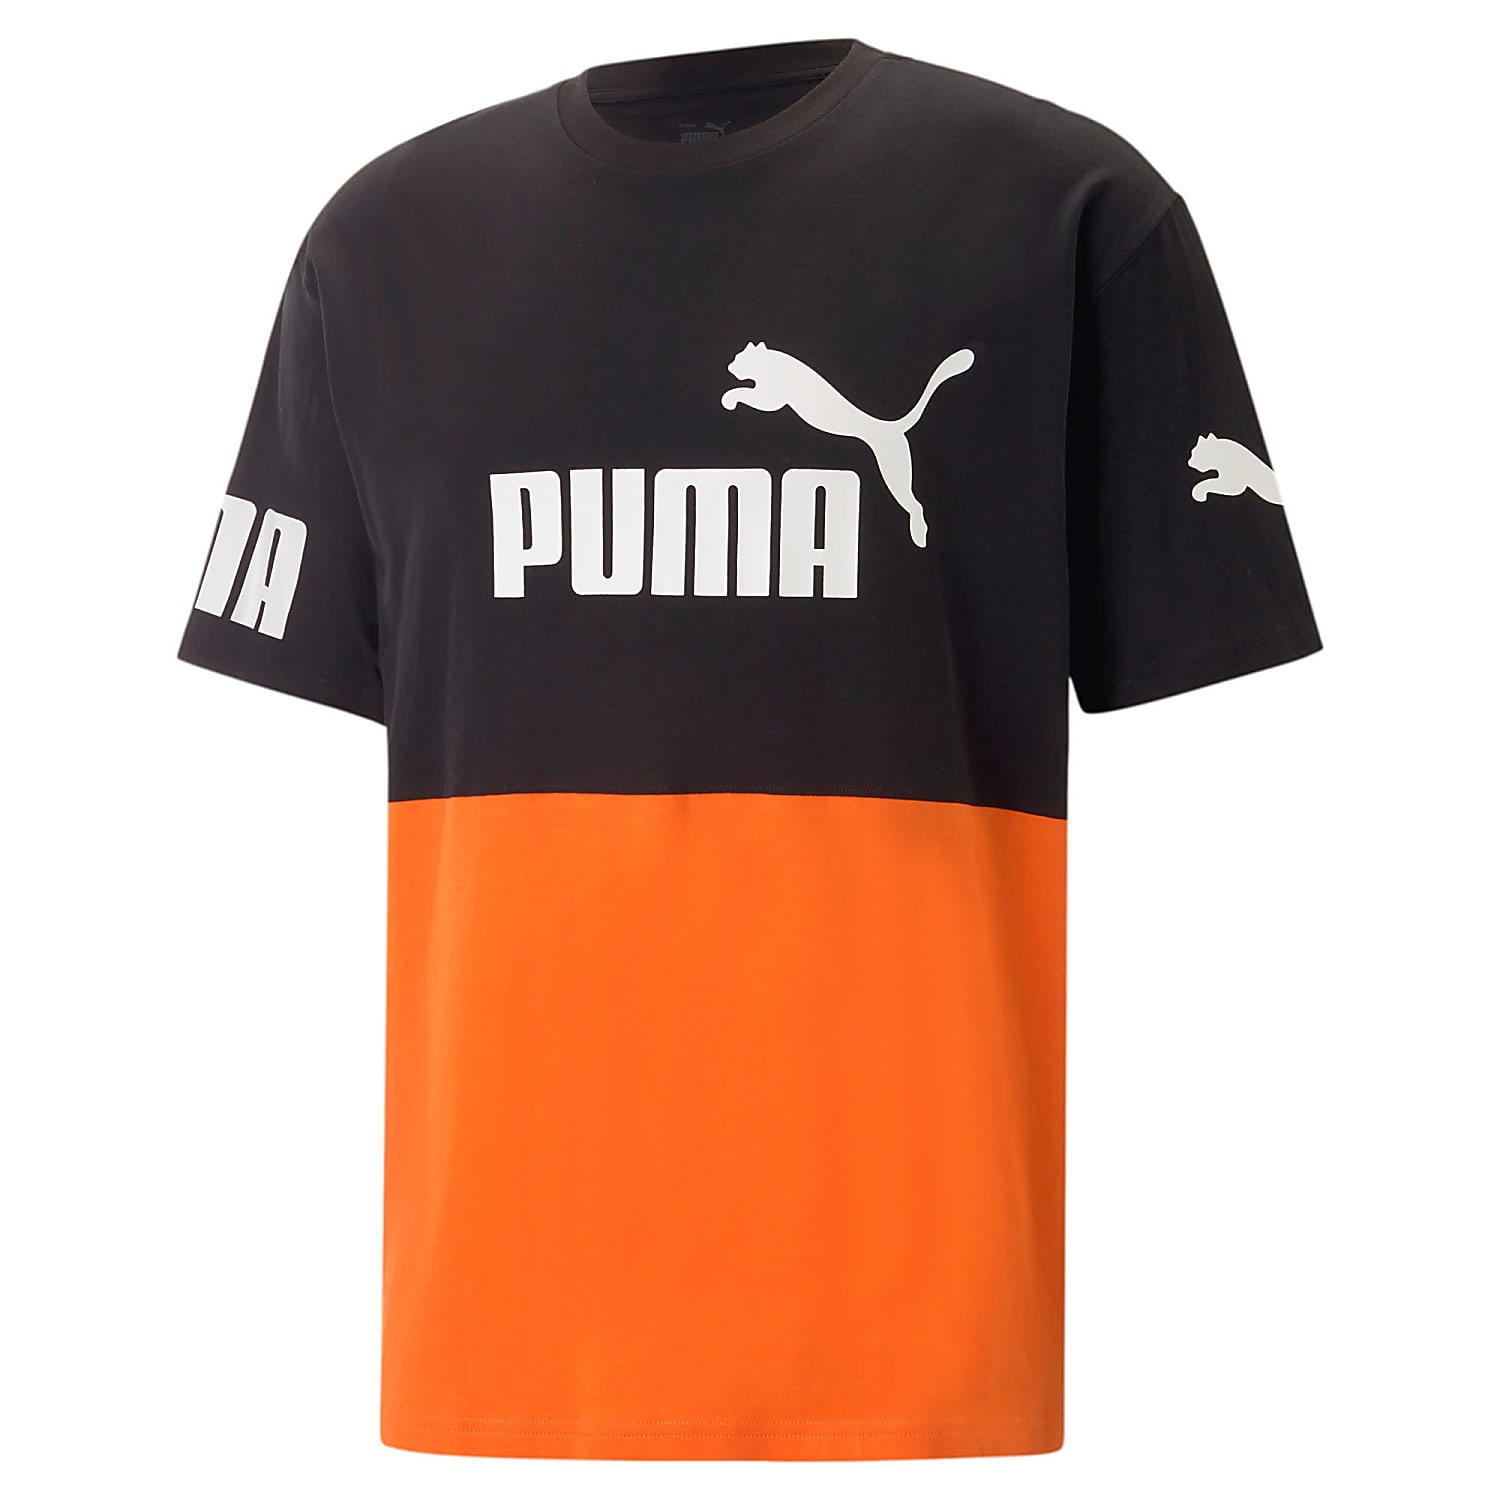 Puma M PUMA - COLORBLOCK Fast cheap Cayenne shipping TEE, POWER Pepper and